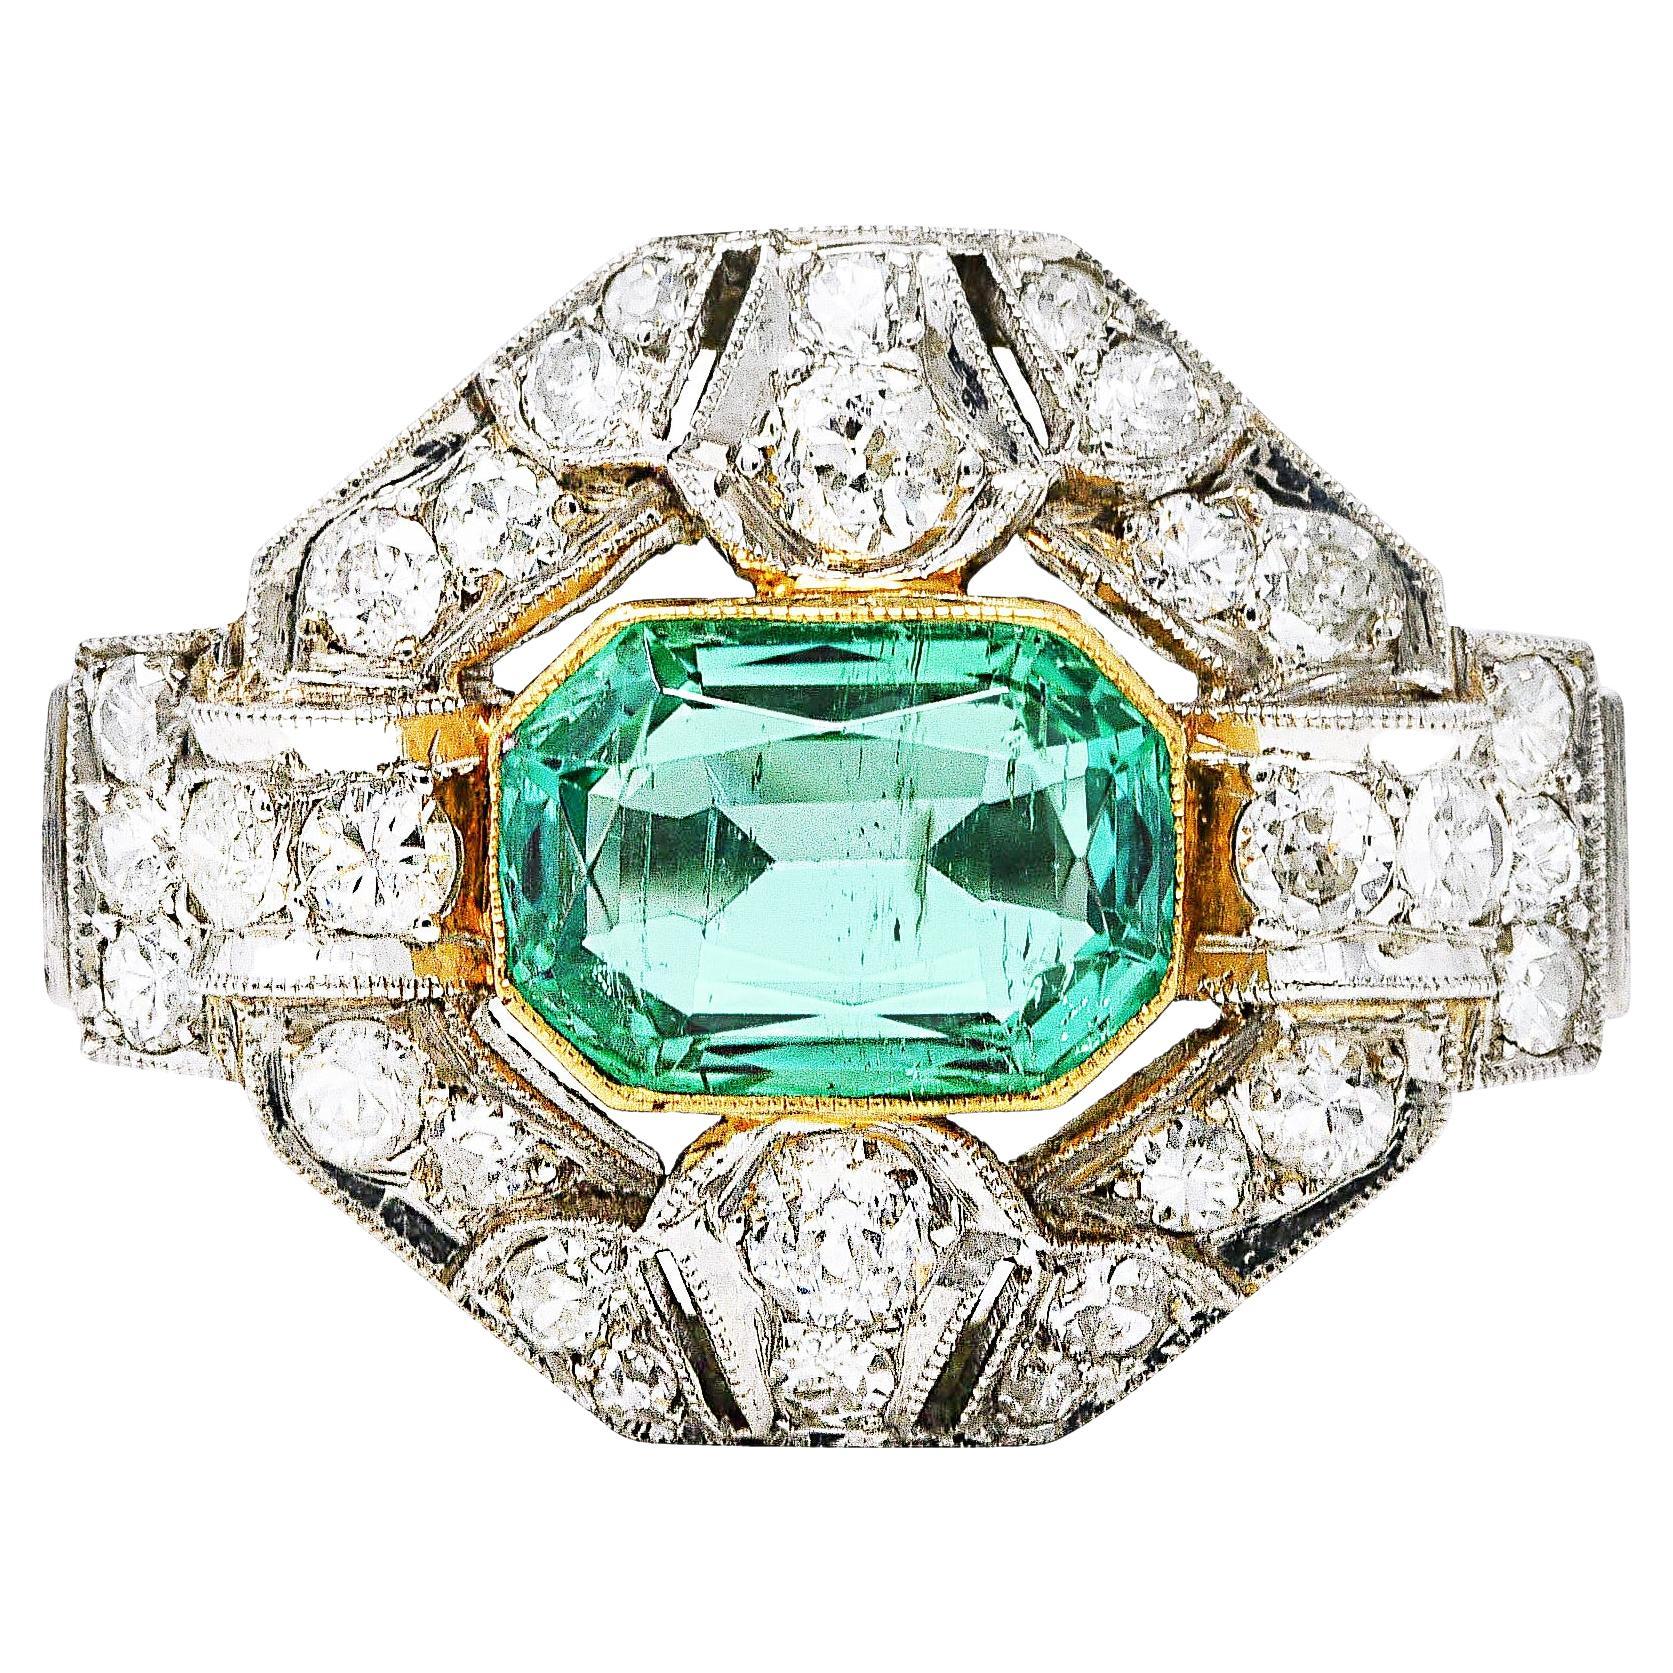 East to West cluster ring is designed as a hexagonal form with arched banding and stepped shoulders. Centering an emerald cut Colombian emerald weighing approximately 2.05 carat. Transparent green in color with no indications of treatment. Bezel set